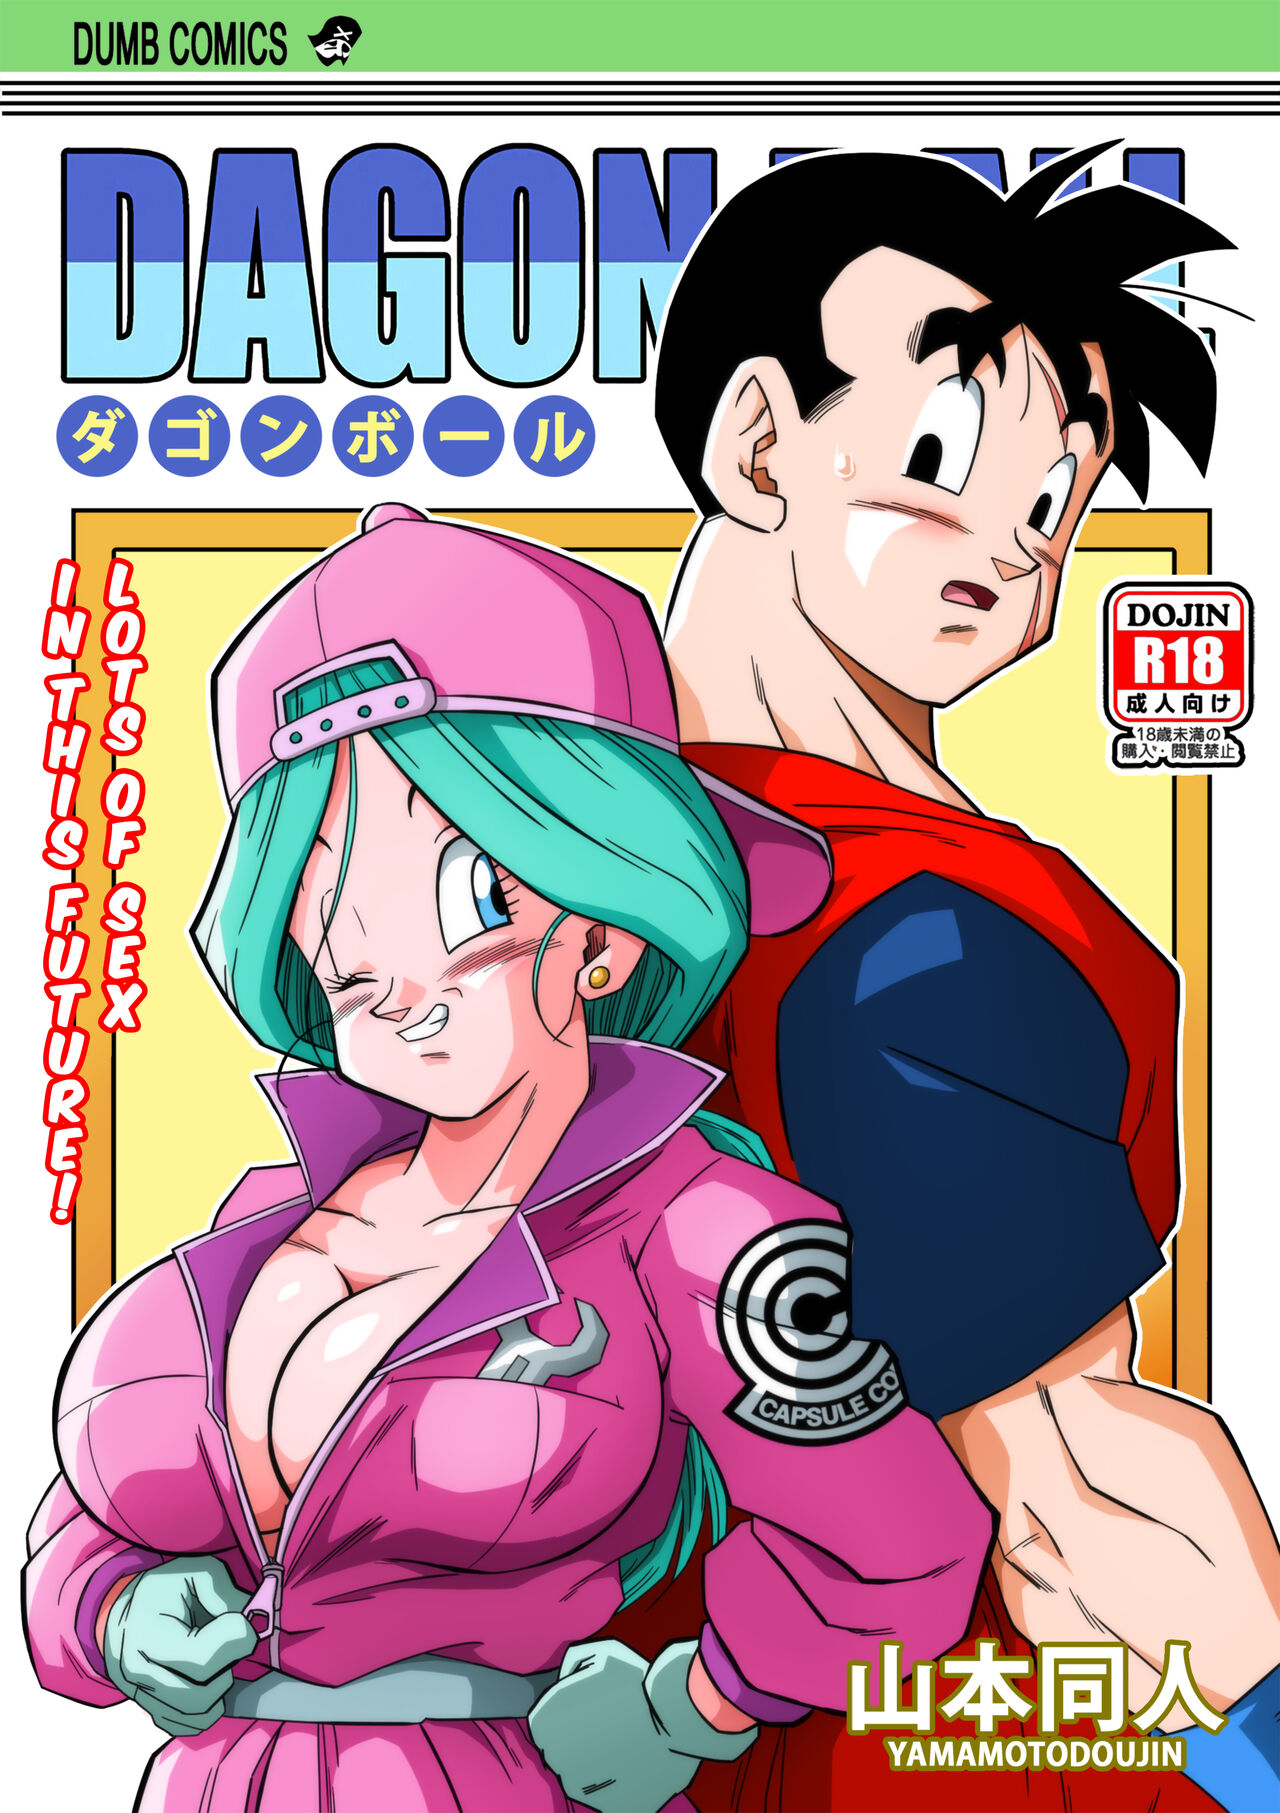 Lost of sex in this Future! - BULMA and GOHAN (Dragon Ball Z) [Decensored]  - porn comics free download - comixxx.net